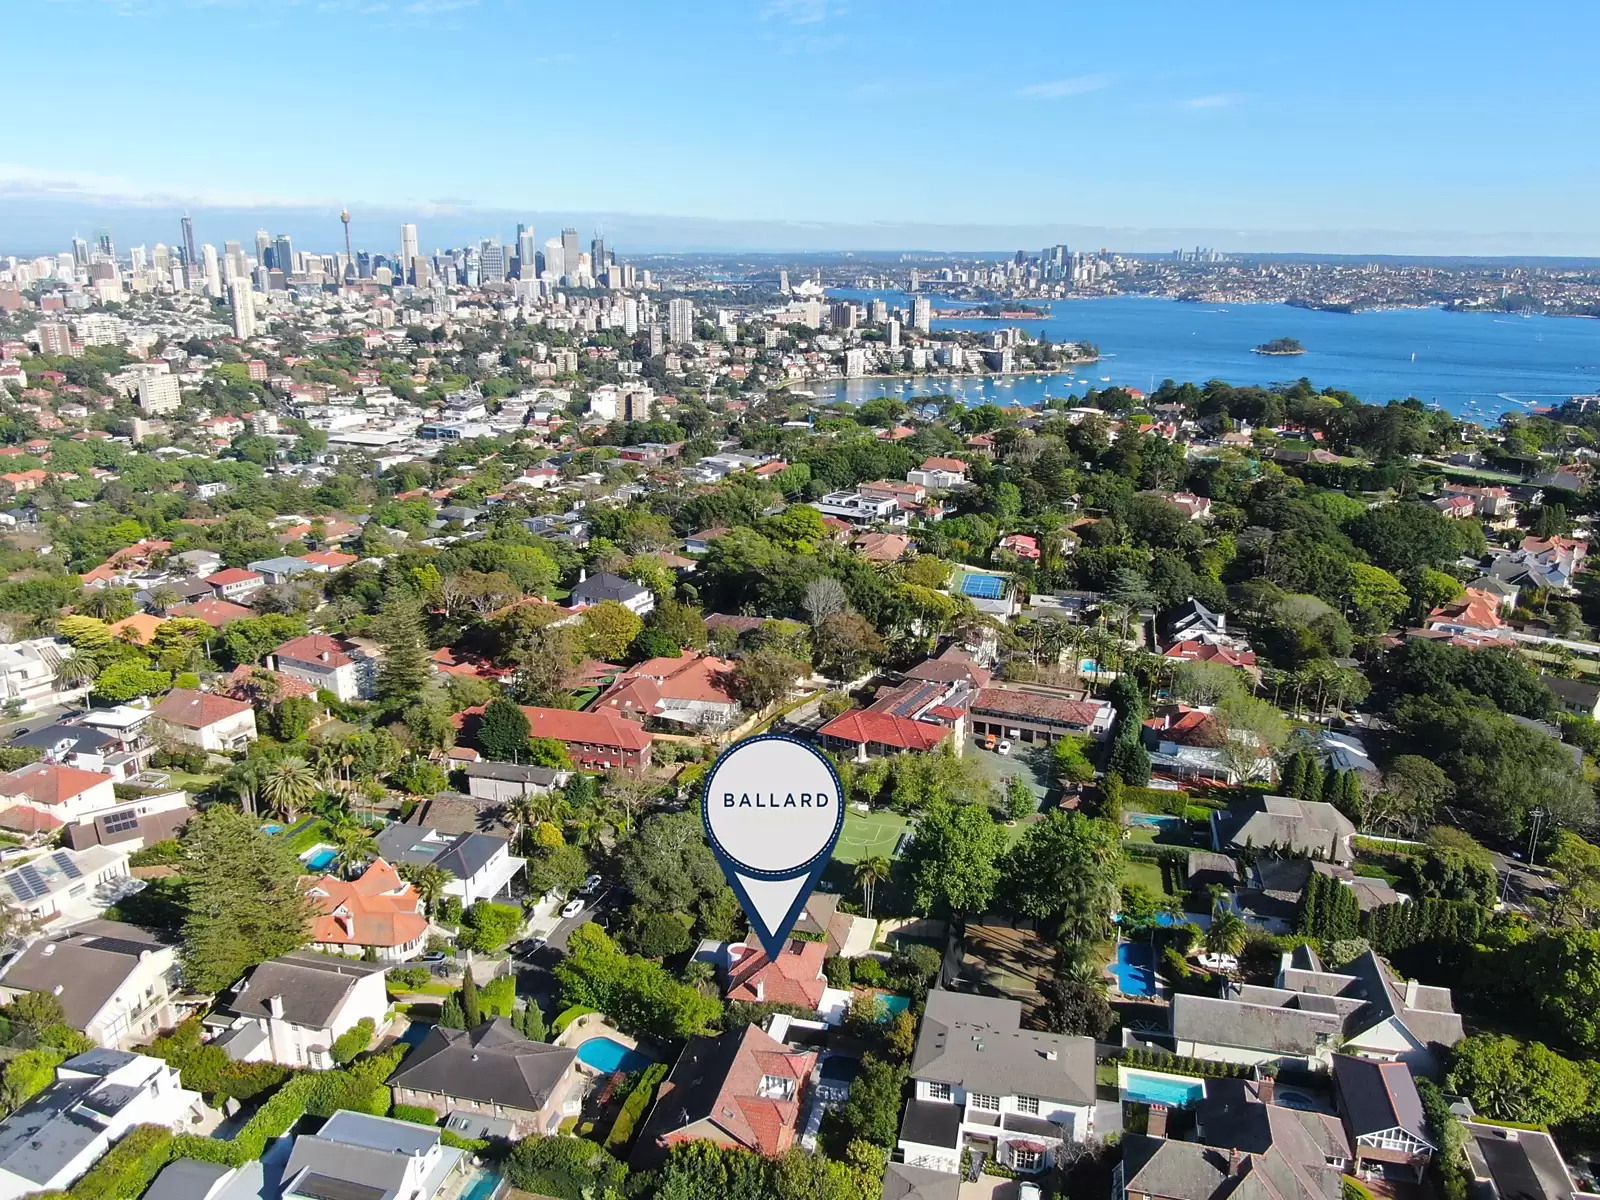 Photo #16: 16 Mansion Road, Bellevue Hill - Sold by Sydney Sotheby's International Realty